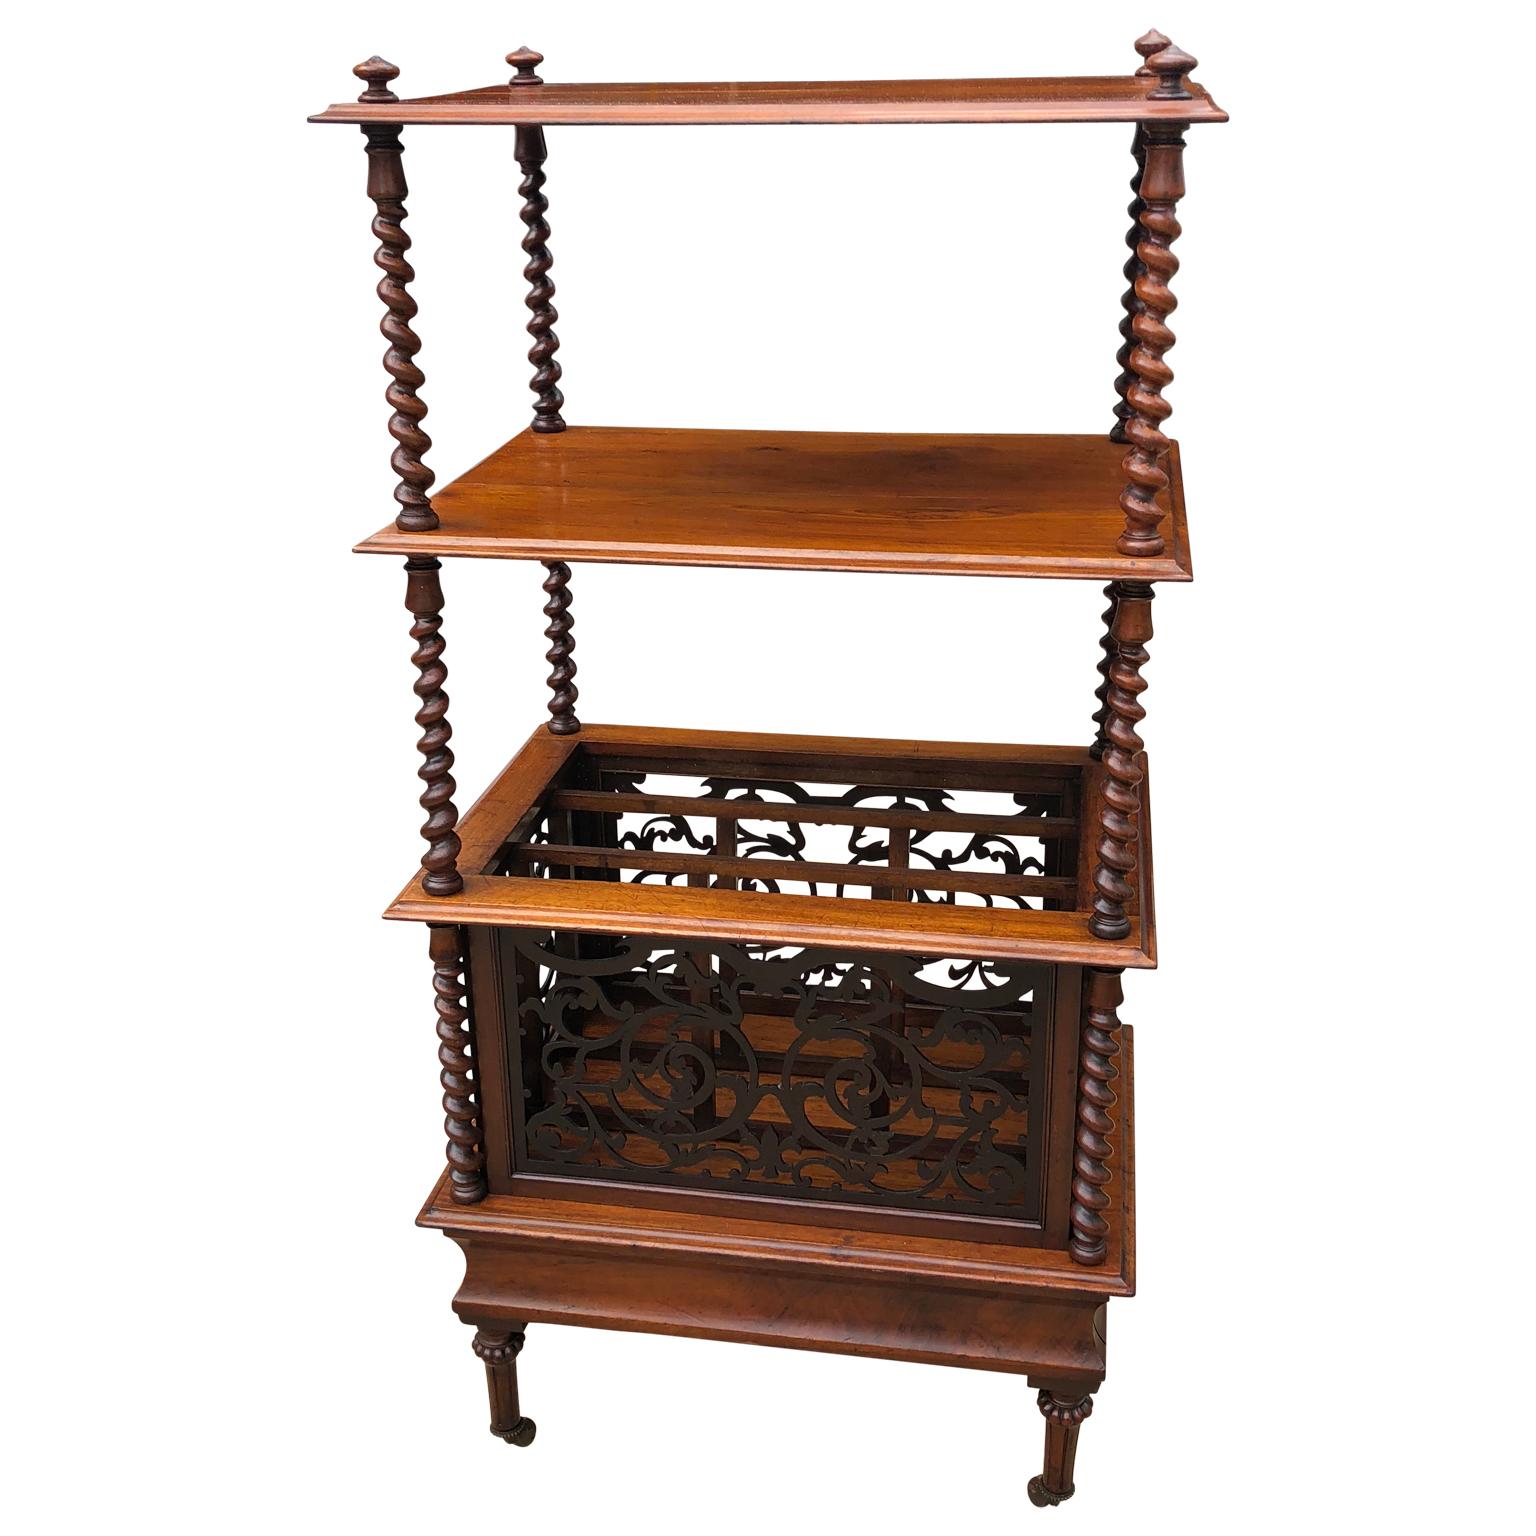 19th Century English Walnut Ètagerè And Music Shelf For Sale at 1stDibs